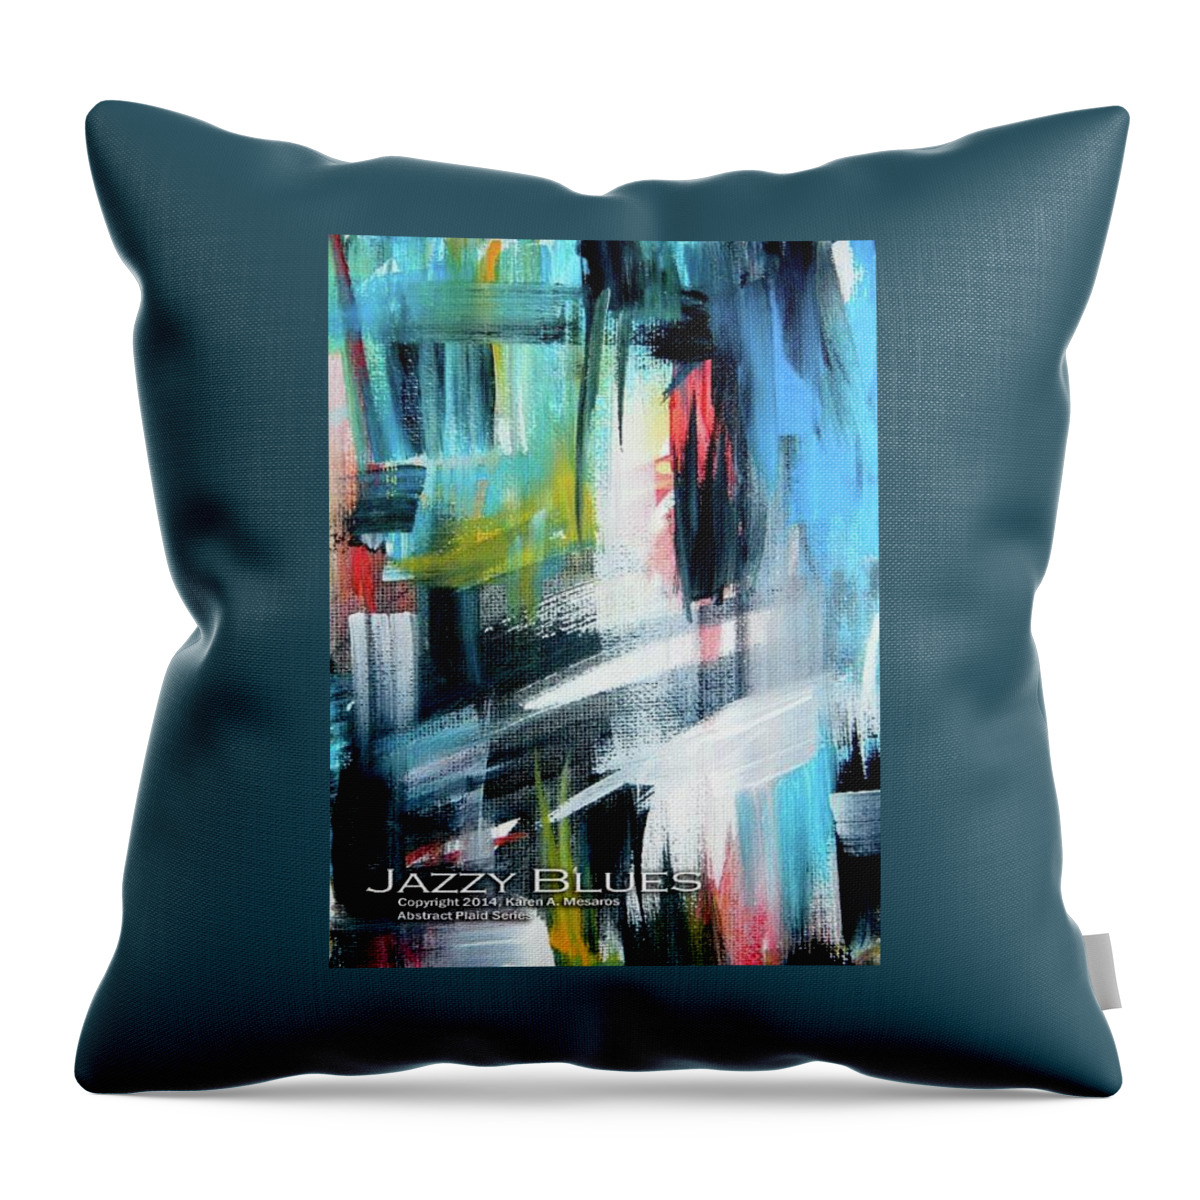 Blue Throw Pillow featuring the painting Jazzy Blues by Karen Mesaros